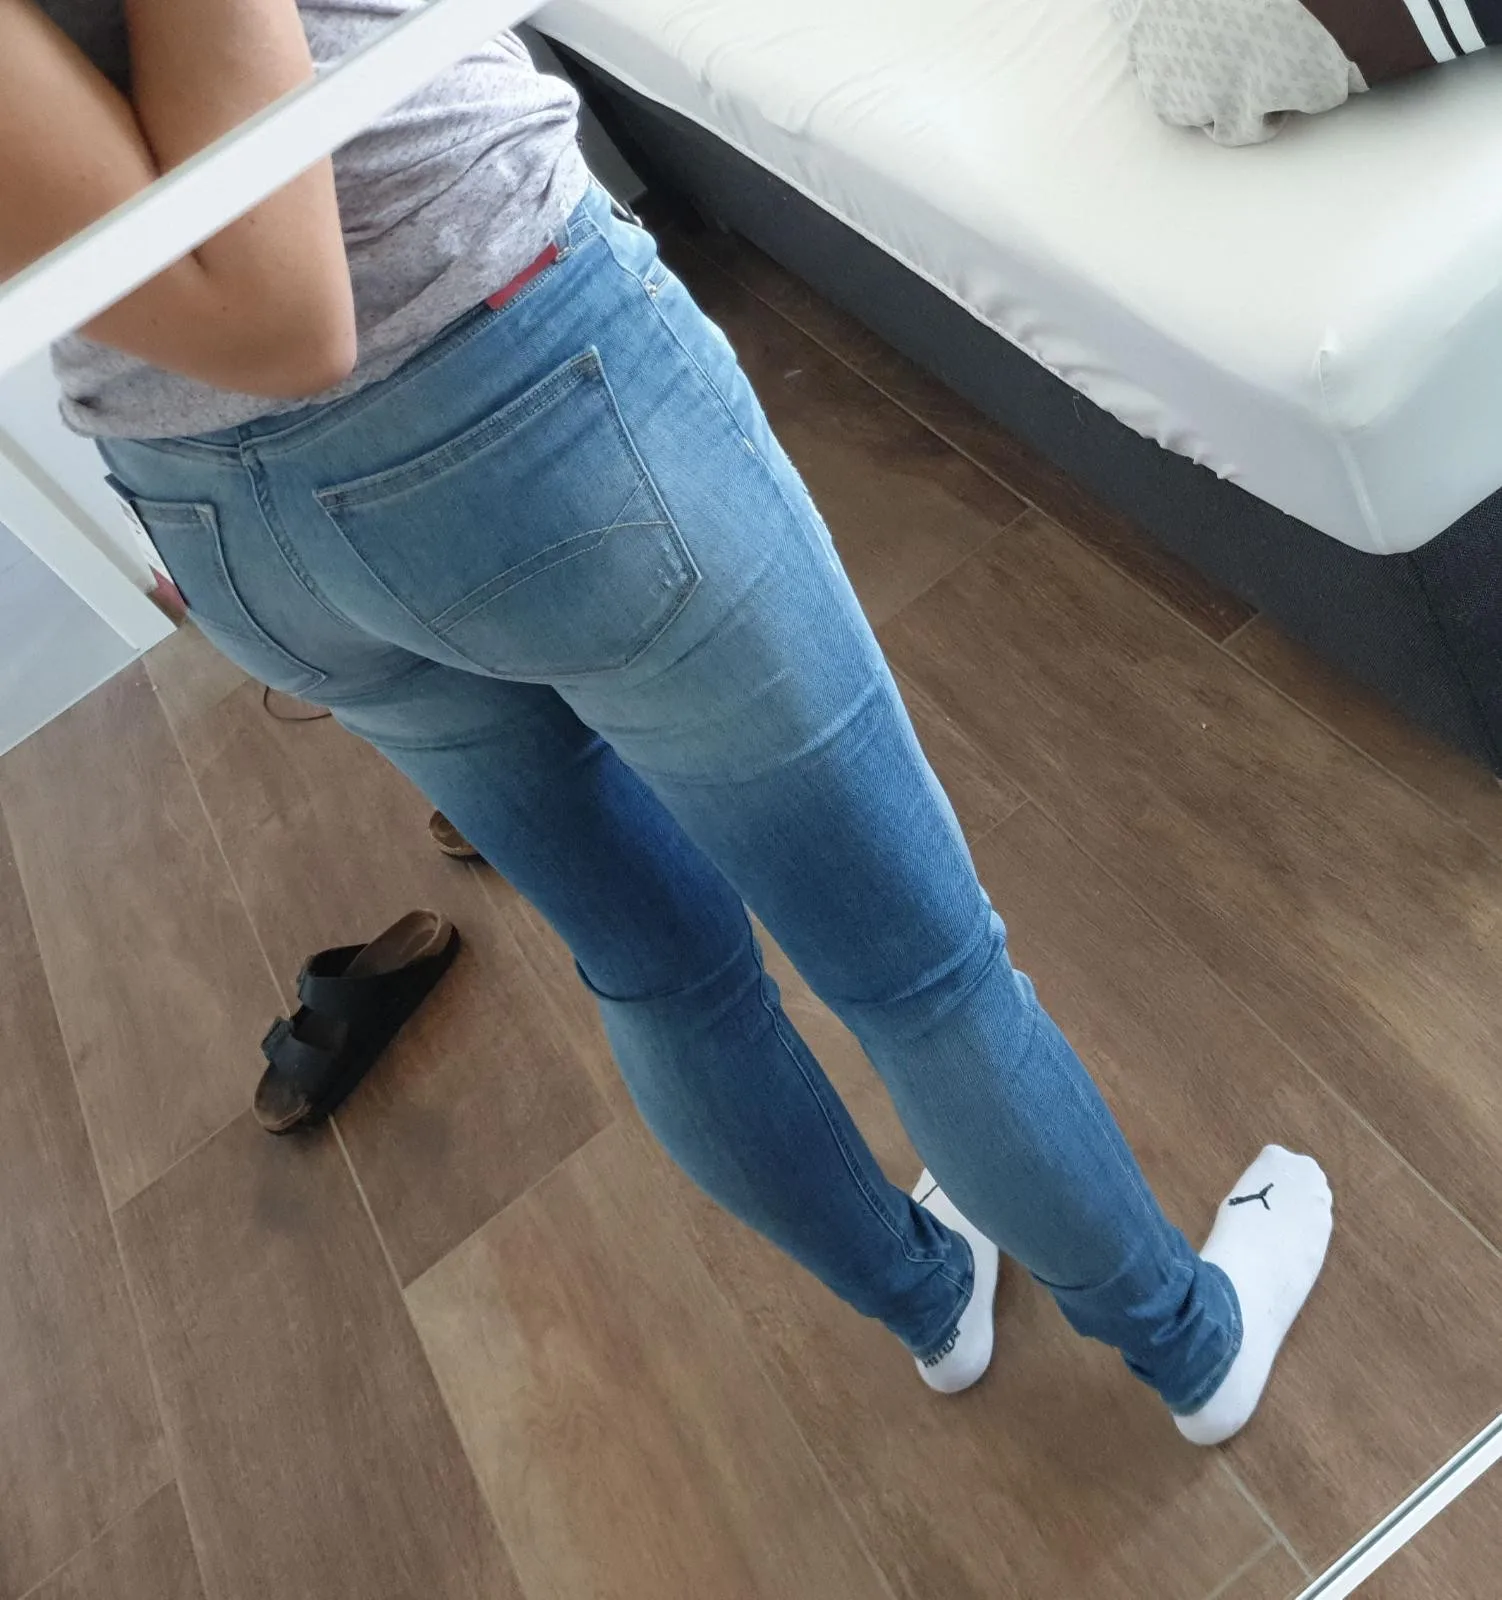 A sexy high quality photo of a girl making a selfie of her ass in tight jeans.